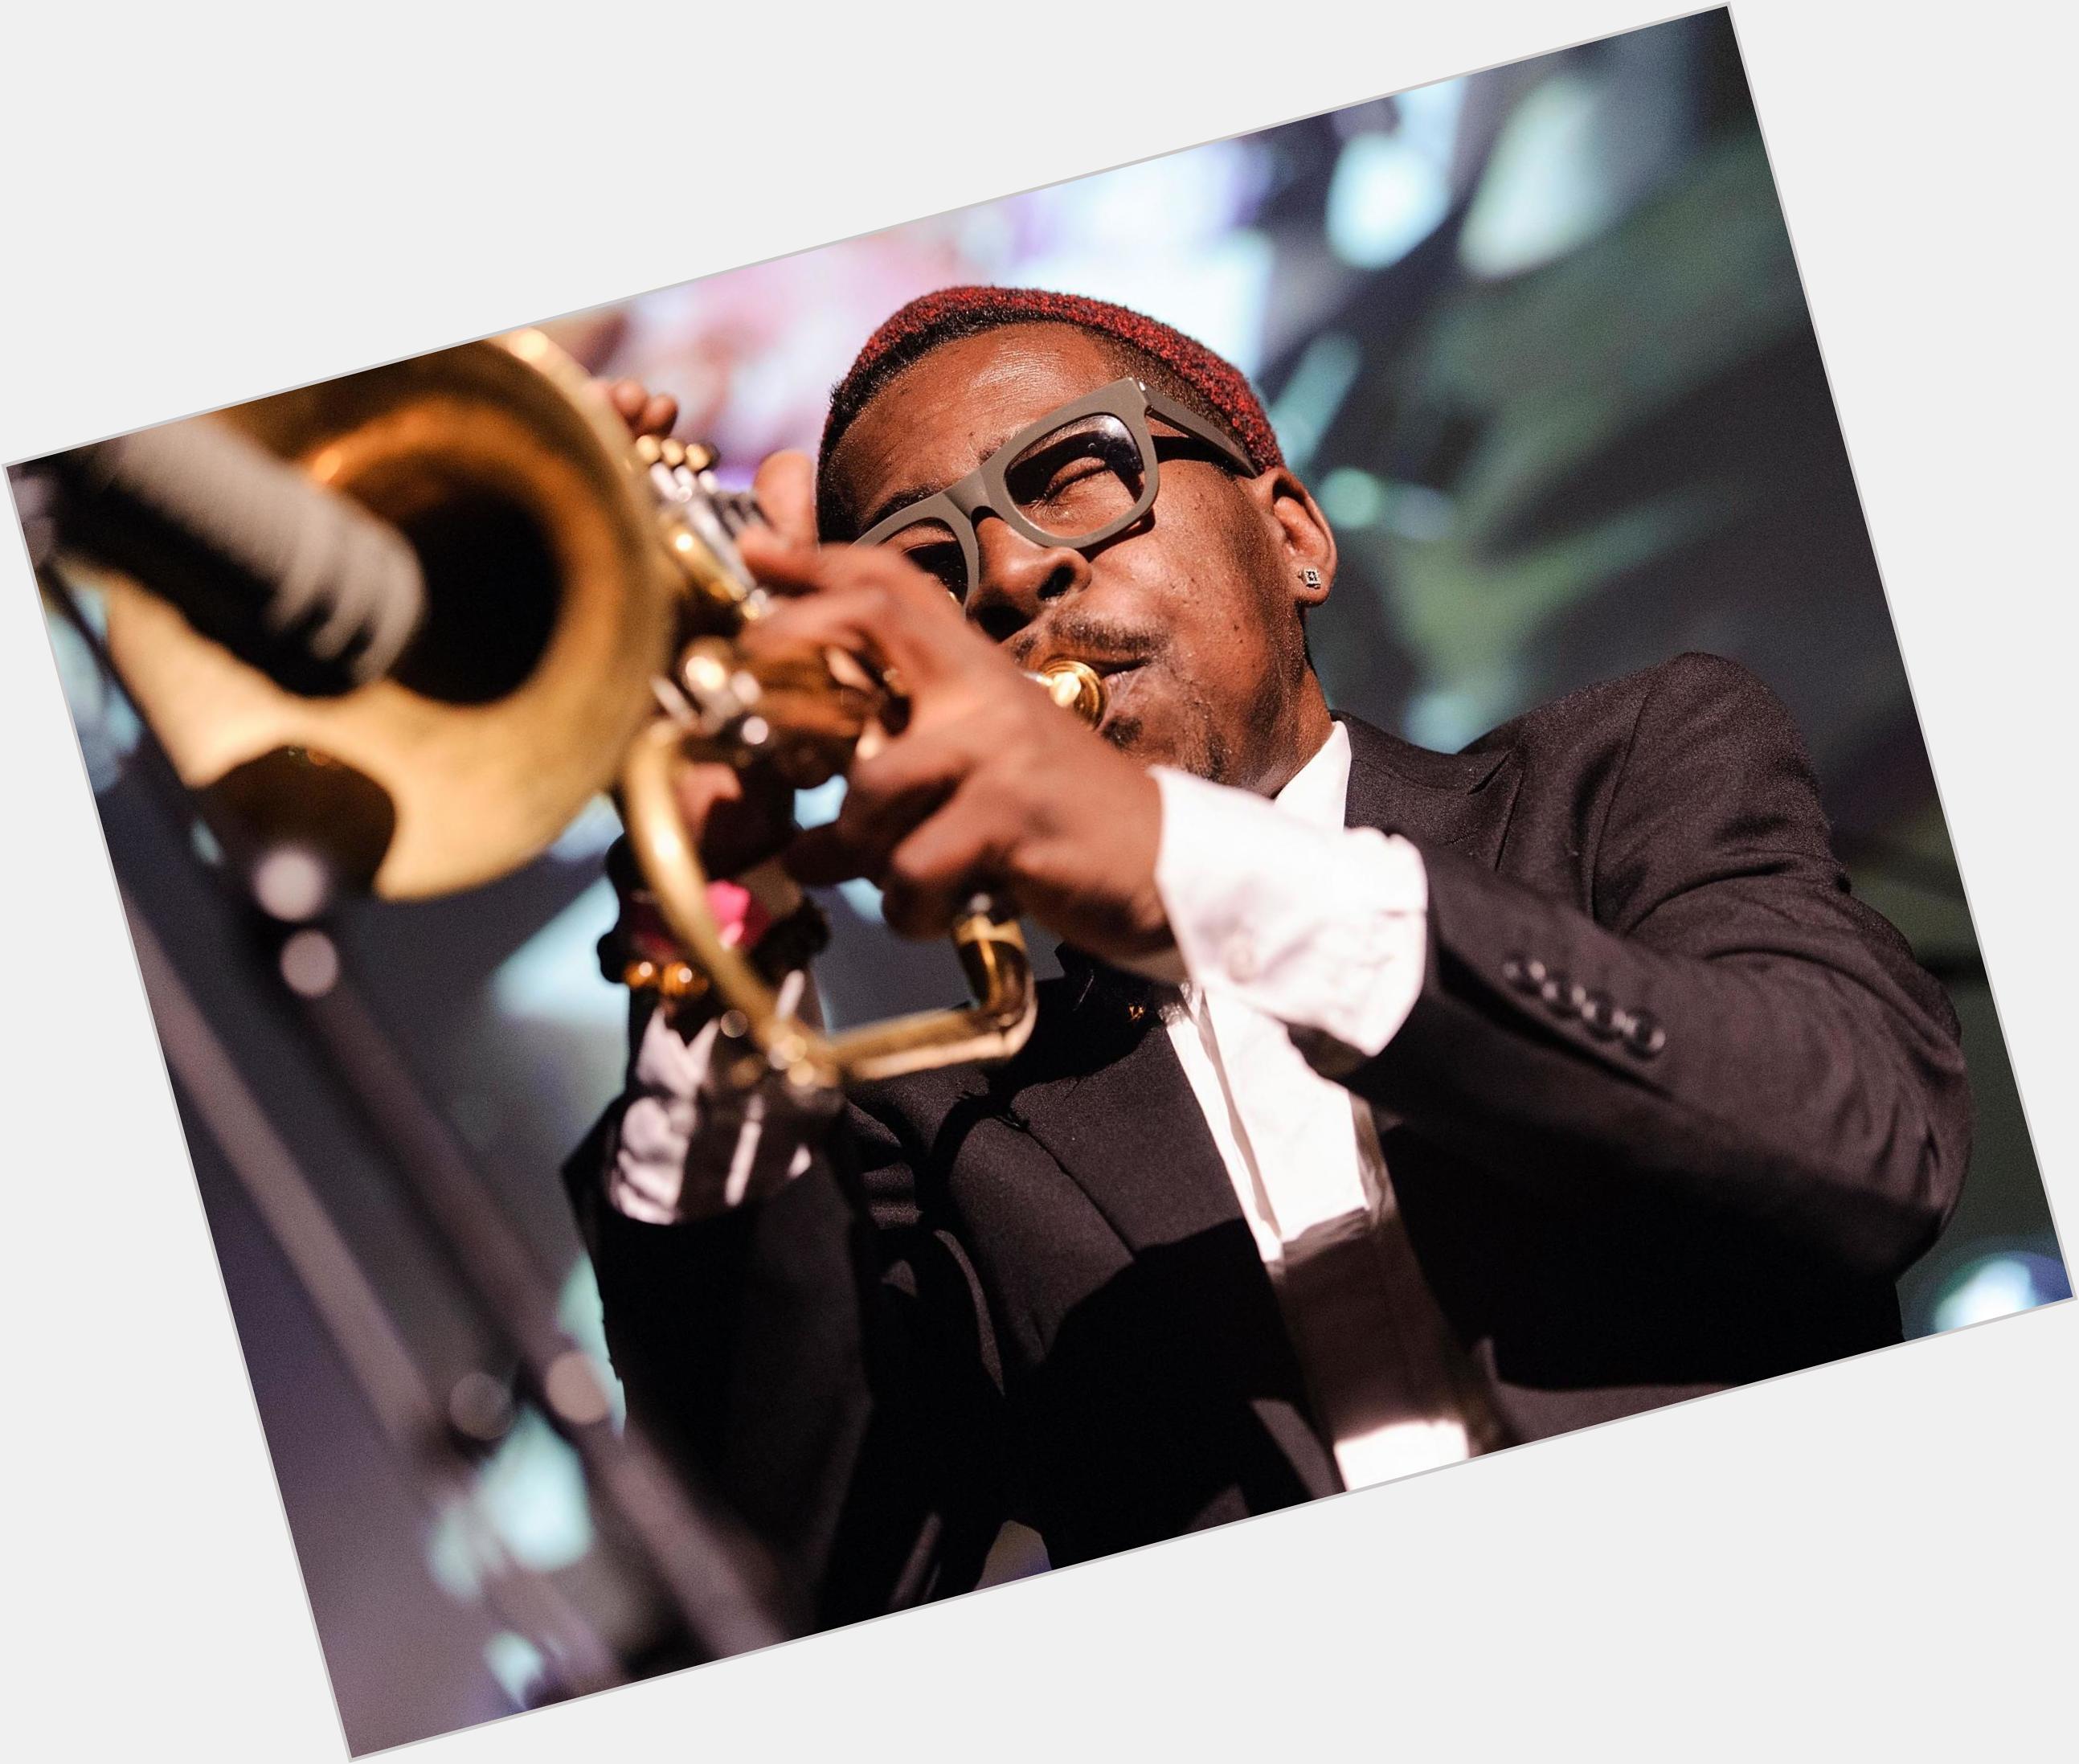 Http://fanpagepress.net/m/R/Roy Hargrove Dating 2